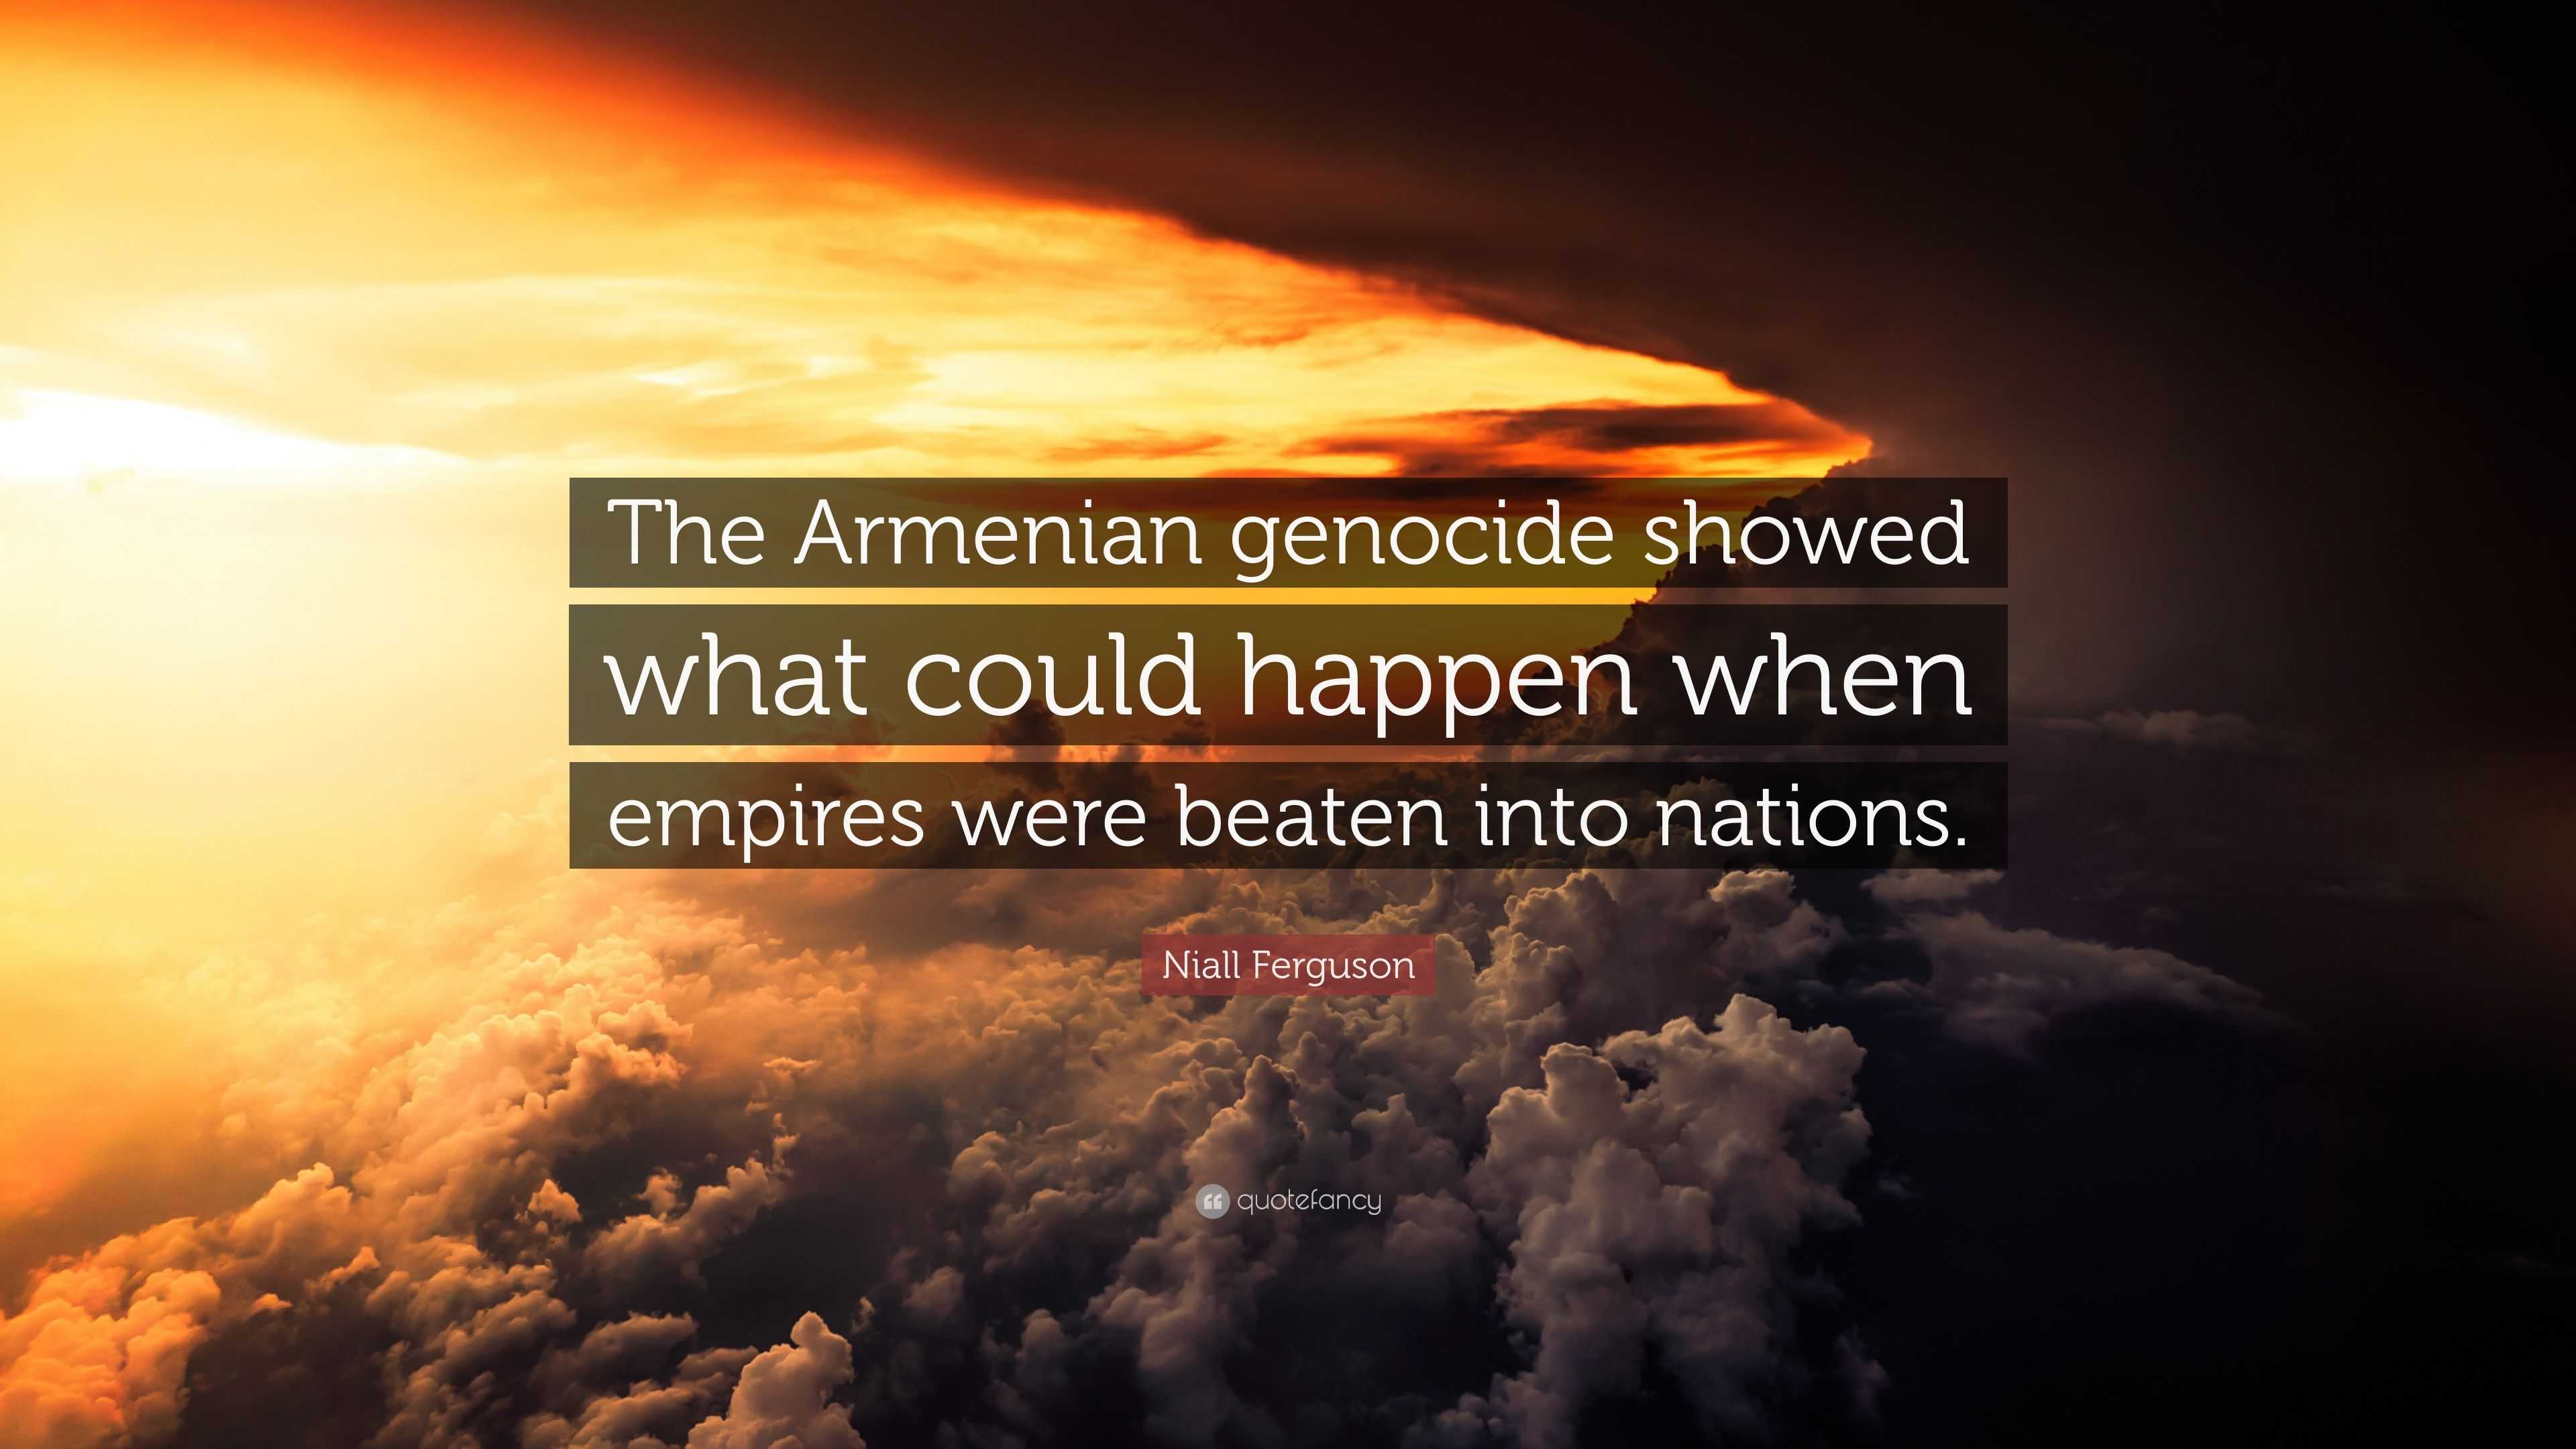 Niall Ferguson Quote: “The Armenian genocide showed what could happen